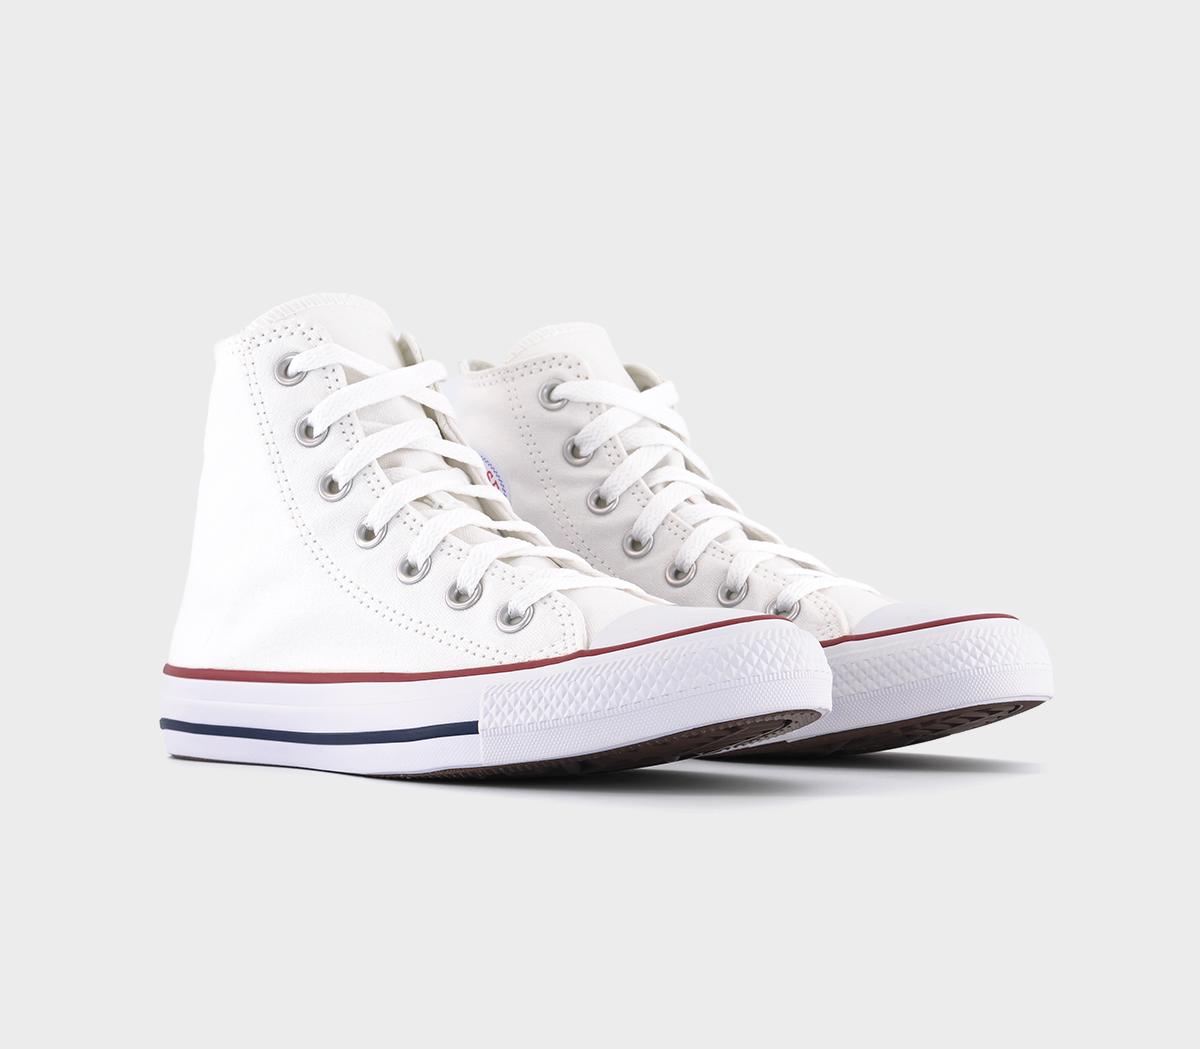 Converse White All Star High Optical Trainers, 10